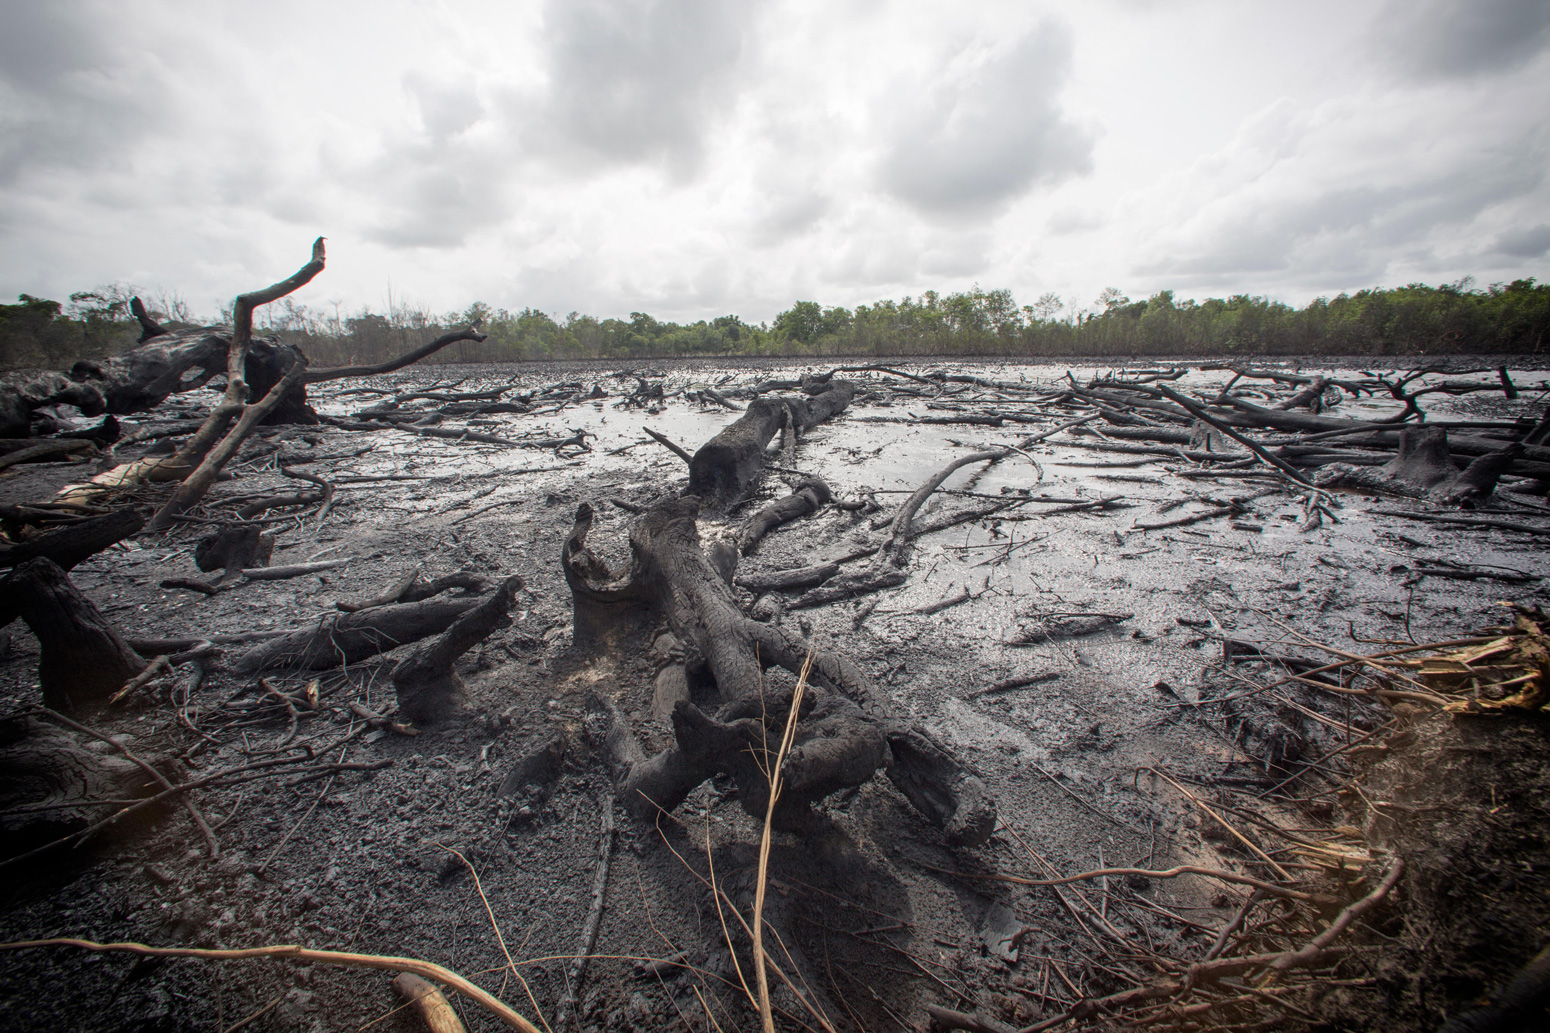 Large swathes of land lay barren as a result of oil leakage from illegal refineries in Delta State, Nigeria.